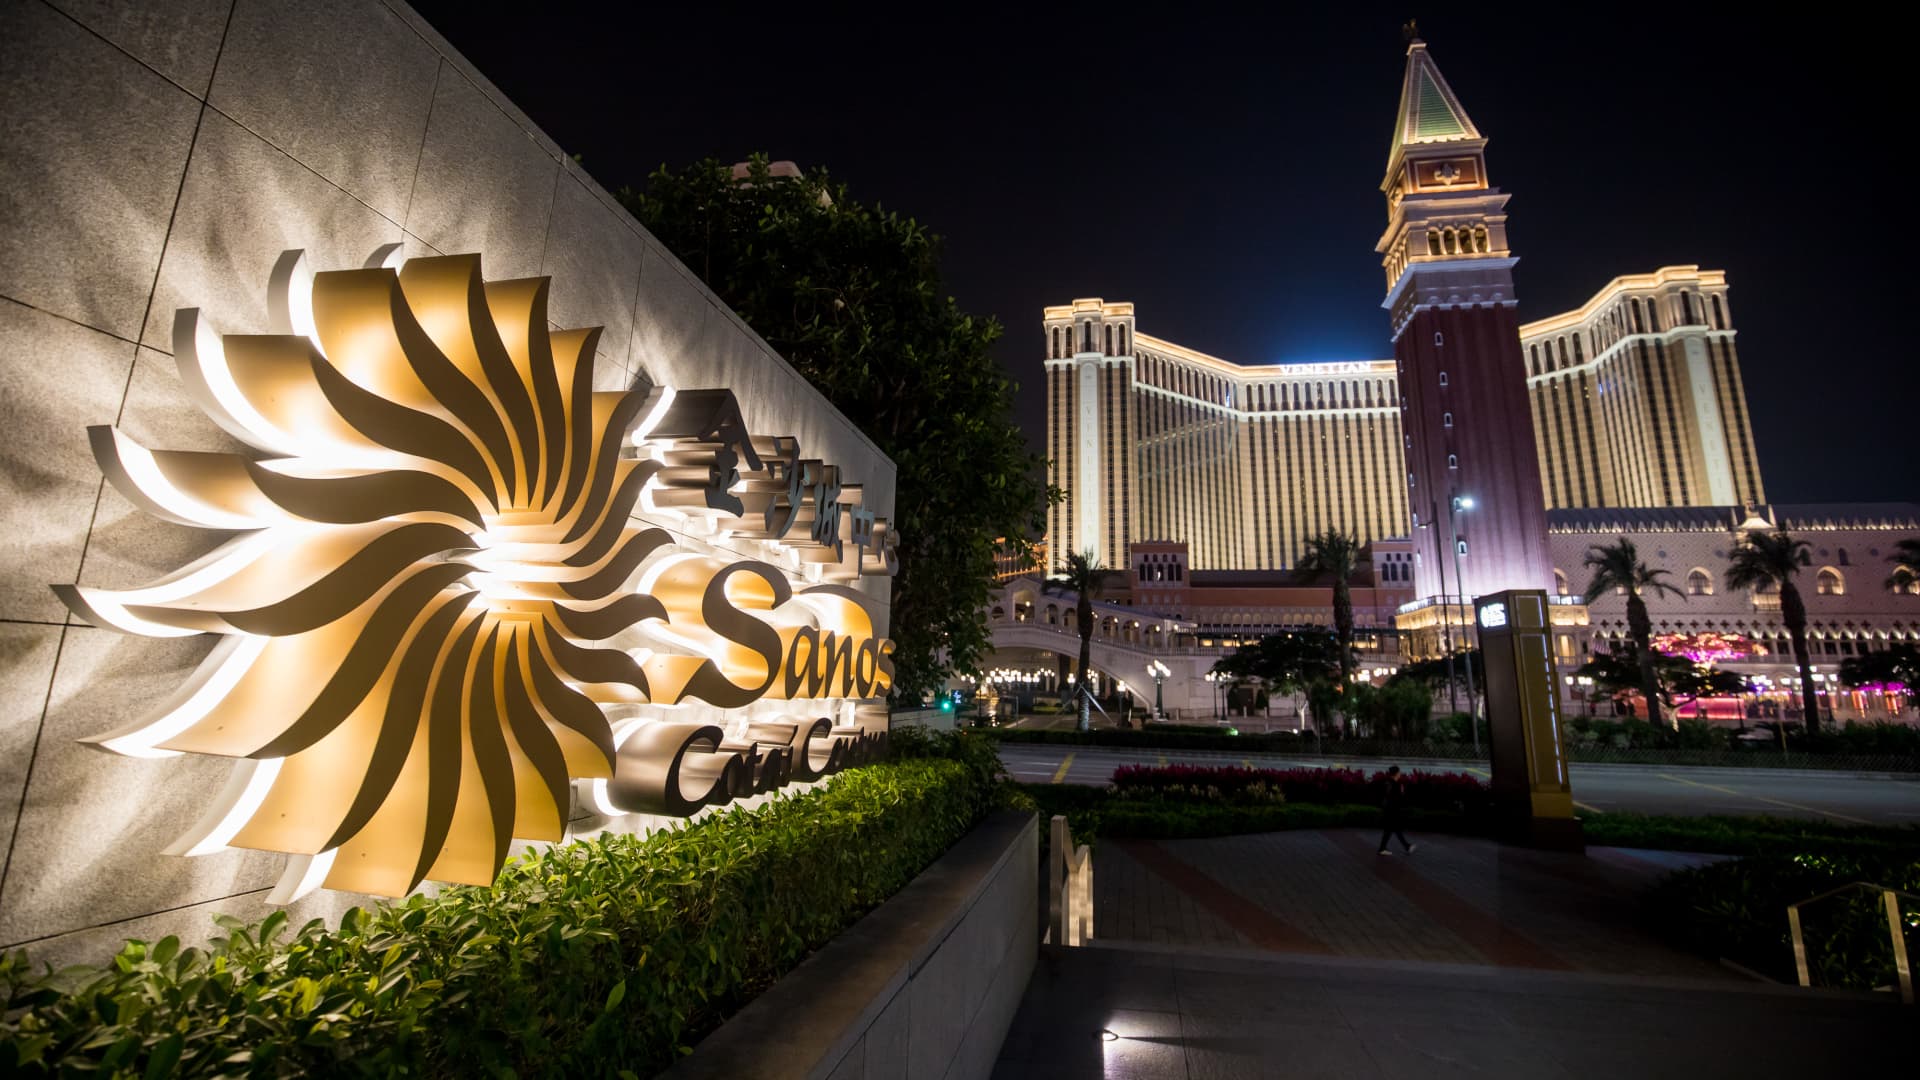 Adelson's Las Vegas Sands to sell Venetian, exiting the Strip